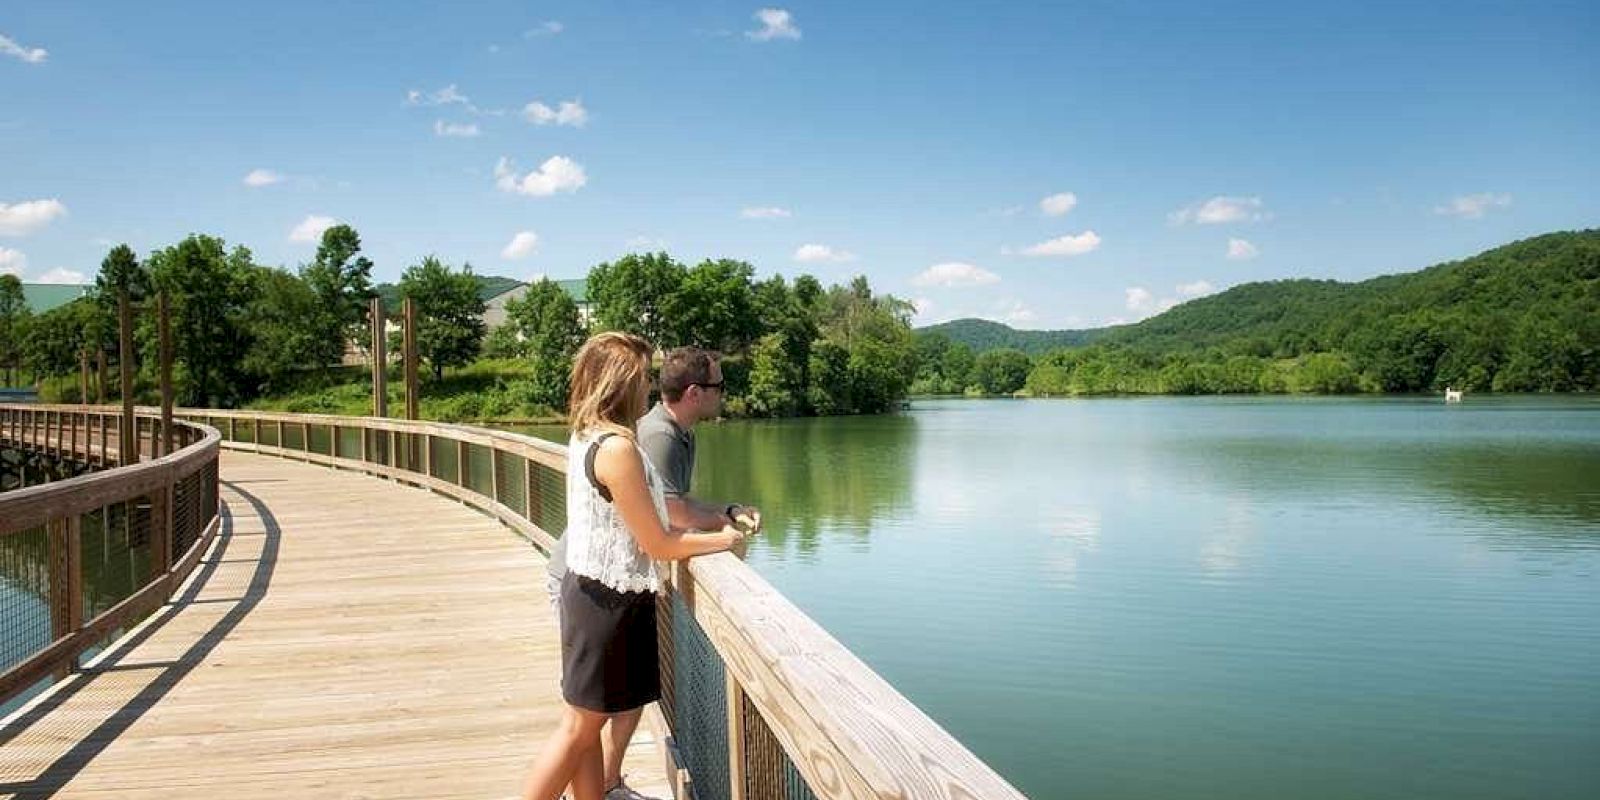 Two people stand on a wooden boardwalk overlooking a serene lake, surrounded by lush greenery and hills under a clear blue sky with scattered clouds.